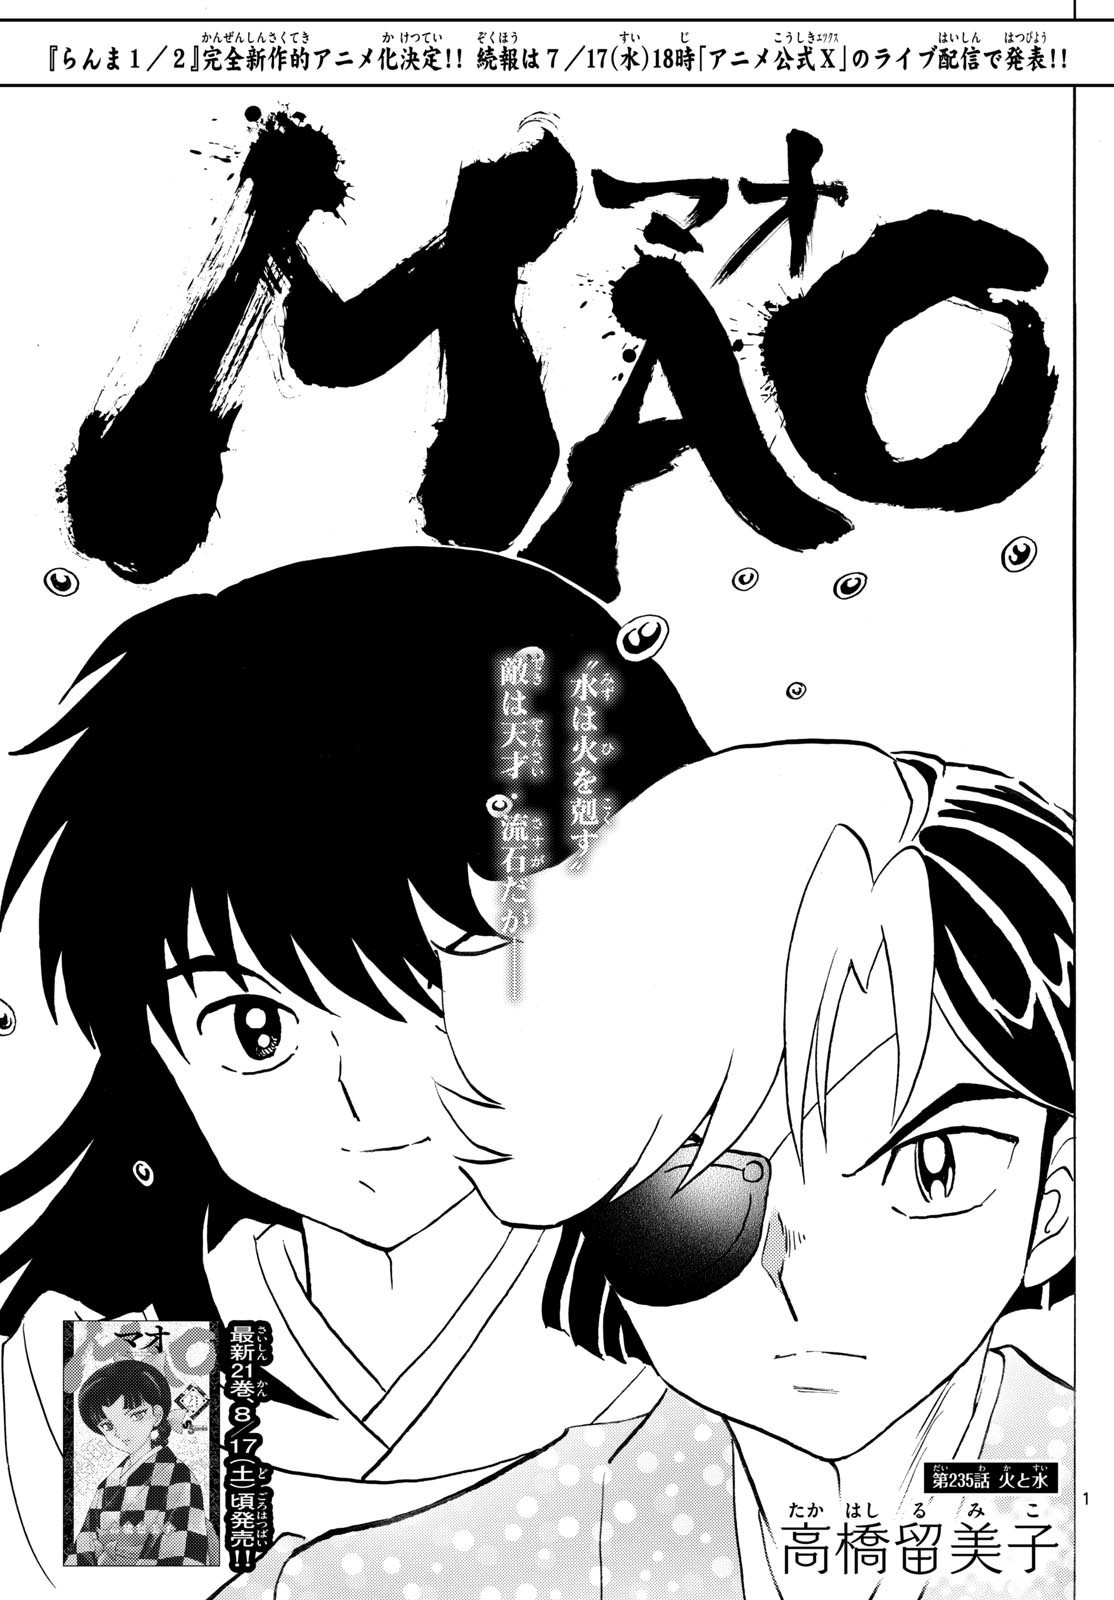 MAO - Chapter 235 - Page 1